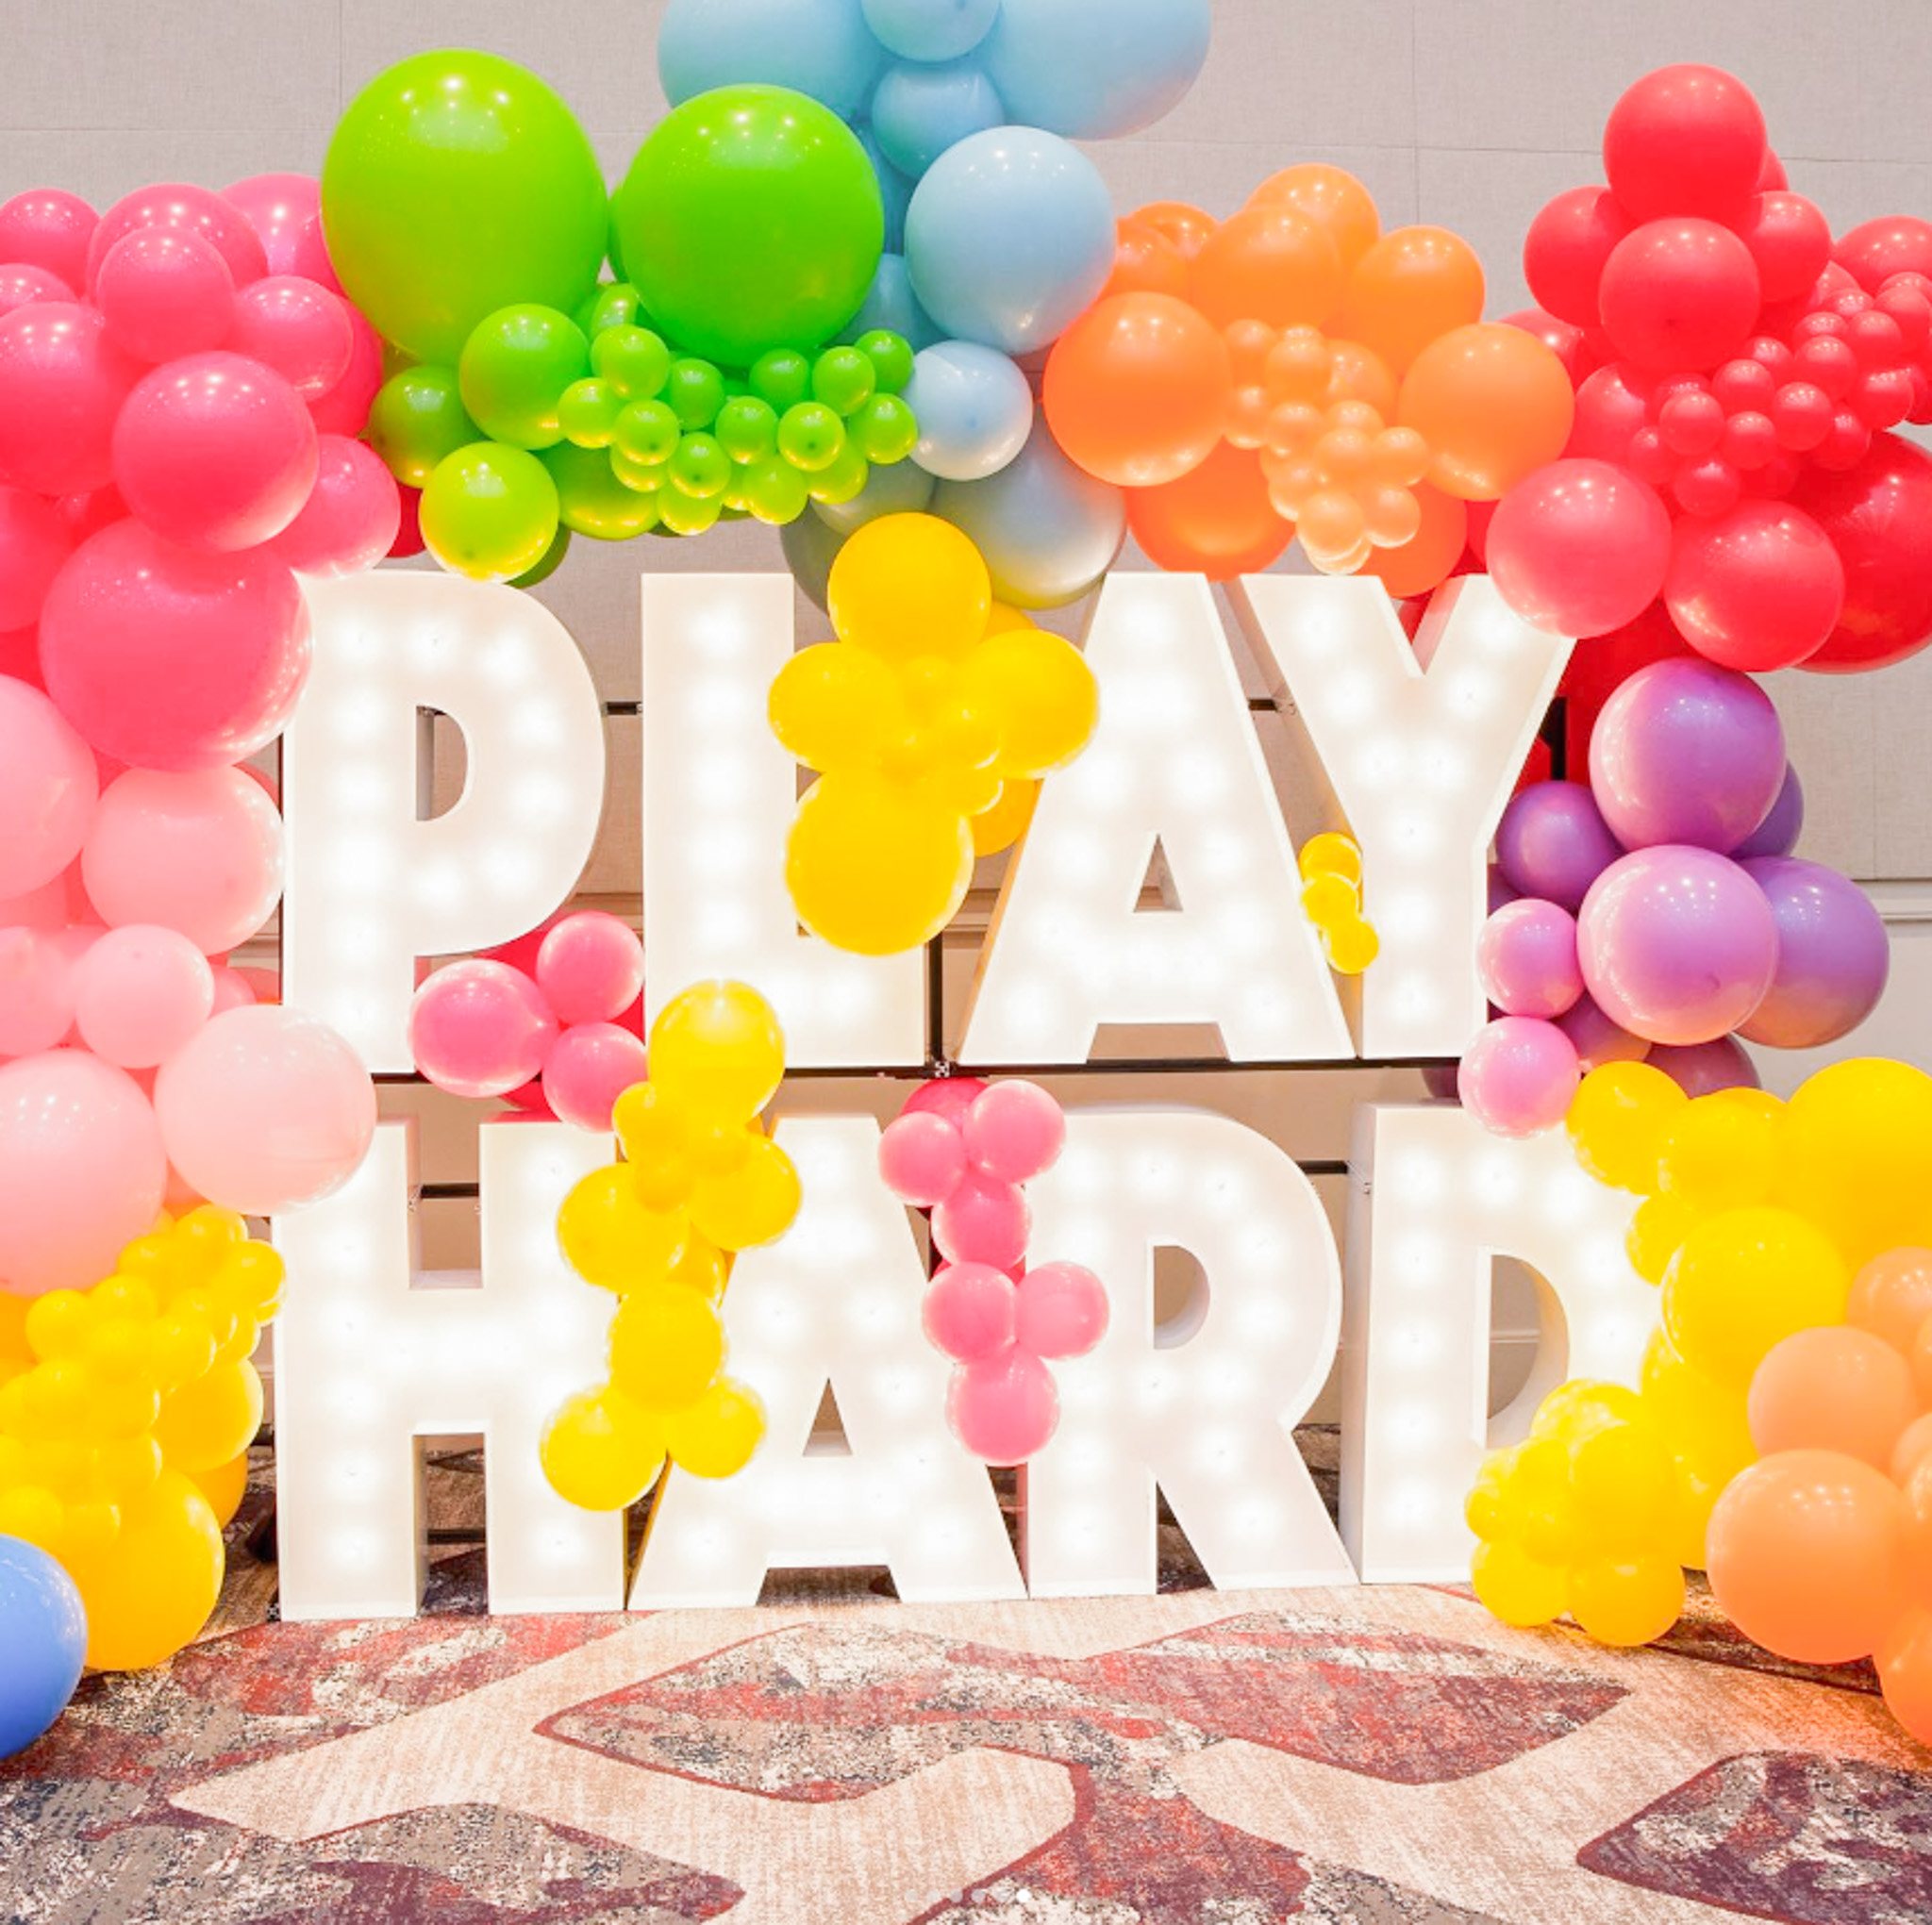 Play Hard spelled out in marquee letters. There are blue, yellow, pink, green, orange, and red balloons surrounding it.